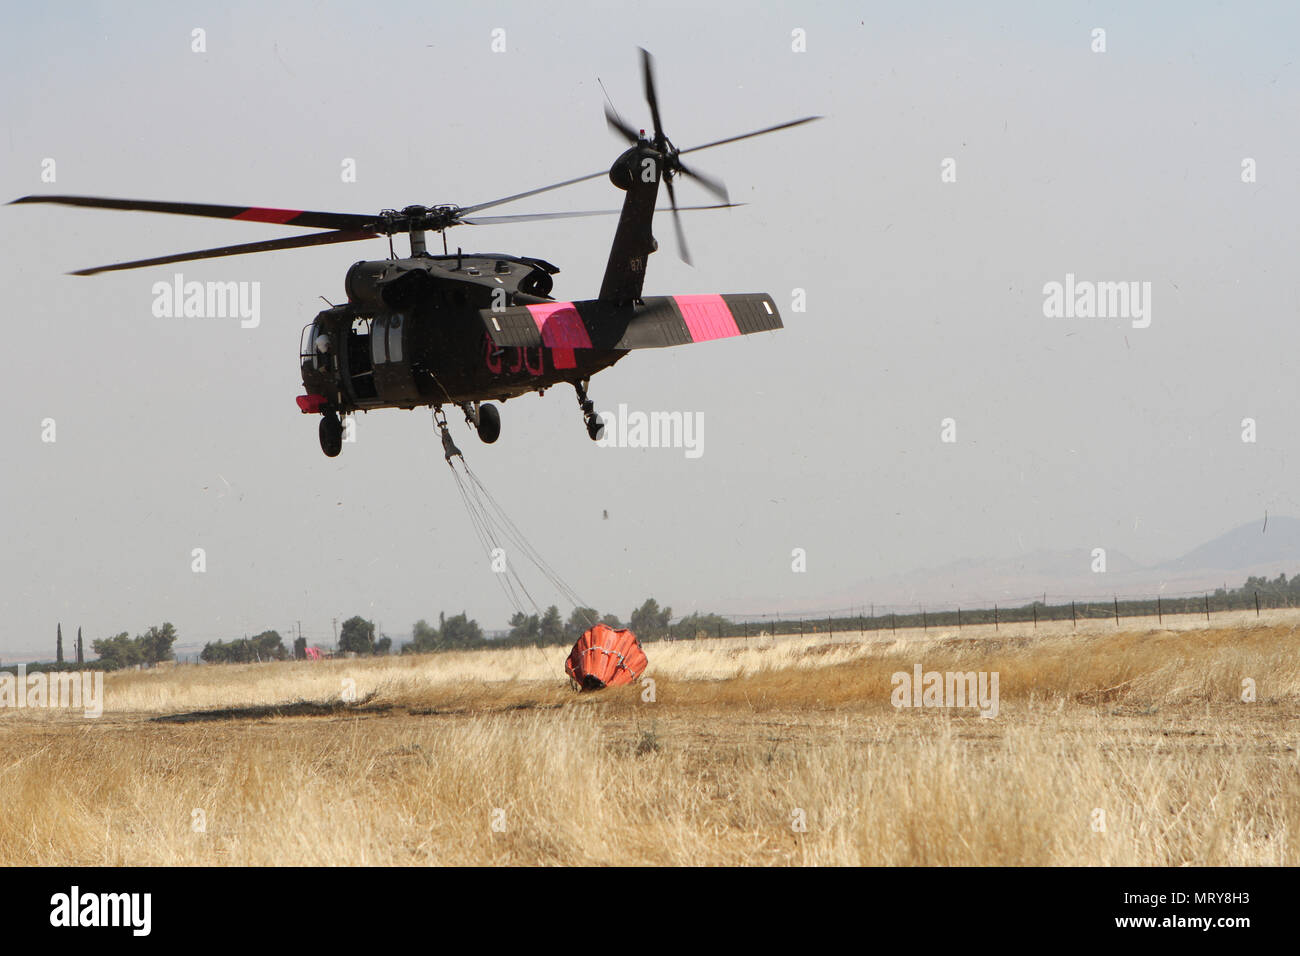 A California Army National Guard UH-60 Black Hawk departs the Coalinga Municipal Airport July 13 to battle the Garza Fire in Kings County, California. Five CalGuard Black Hawks responded to the Garza Fire, one of nearly two dozen wildfires torching the Golden State in mid-July 2017. It had already consumed more than 26,000 acres and was 30 percent contained, per the California Department of Forestry and Fire Protection (CAL FIRE). (Army National Guard photo/Staff Sgt. Eddie Siguenza) Stock Photo